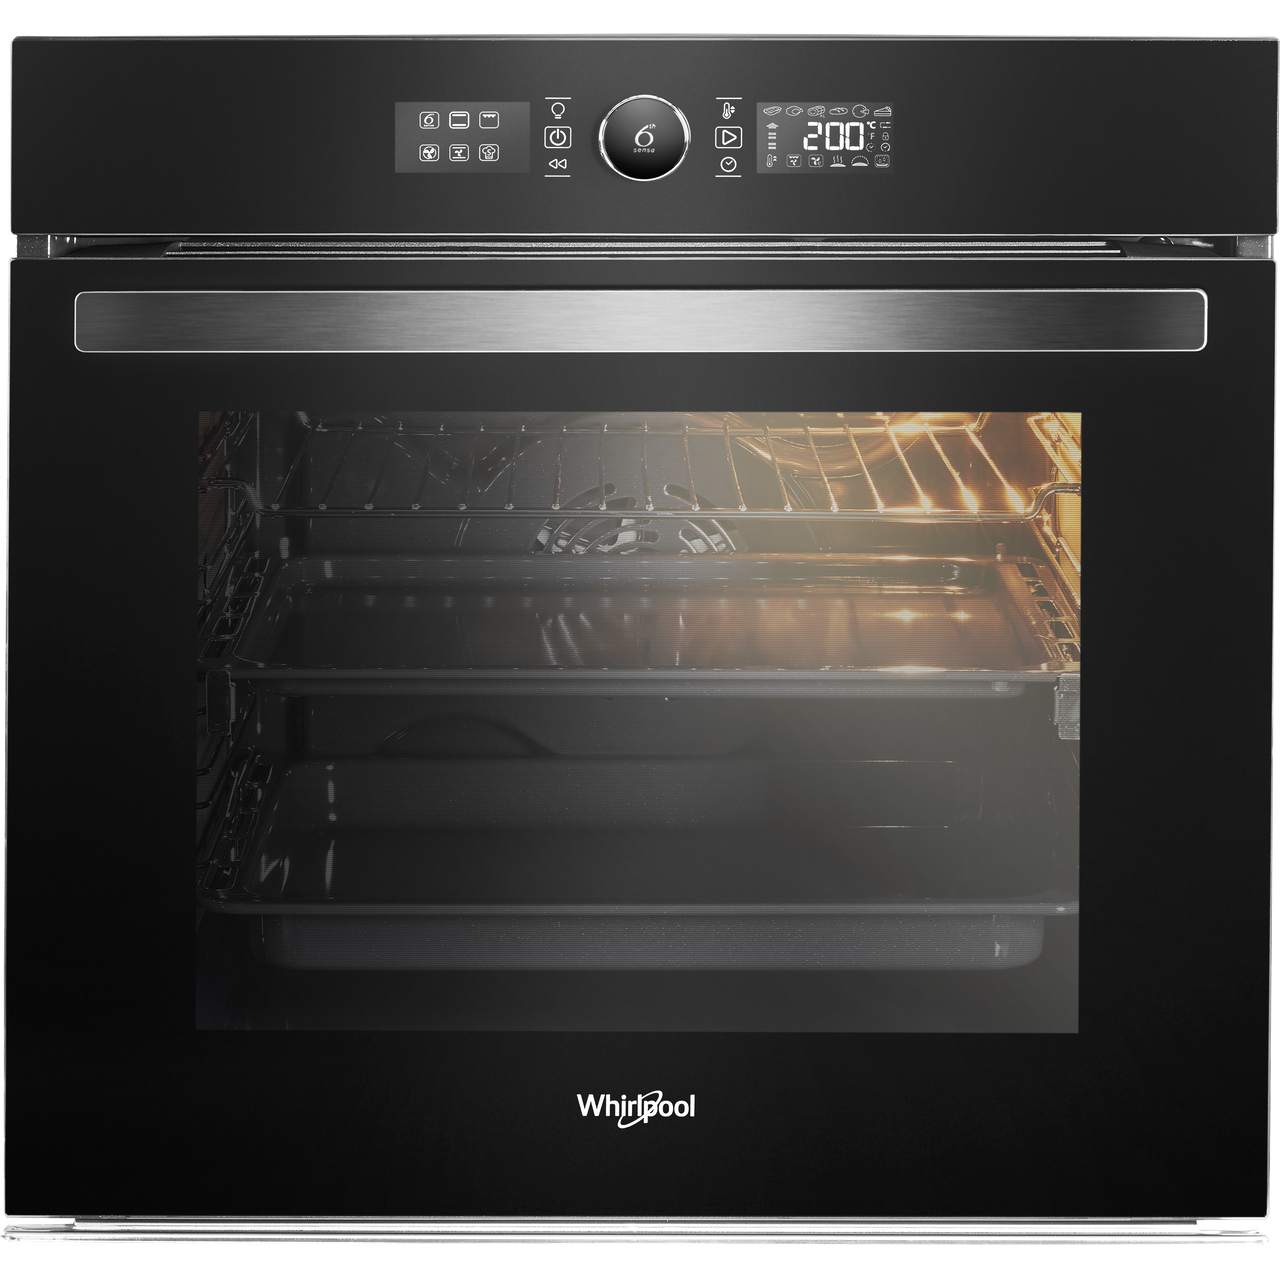 Whirlpool Absolute AKZ96230NB Built In Electric Single Oven Review